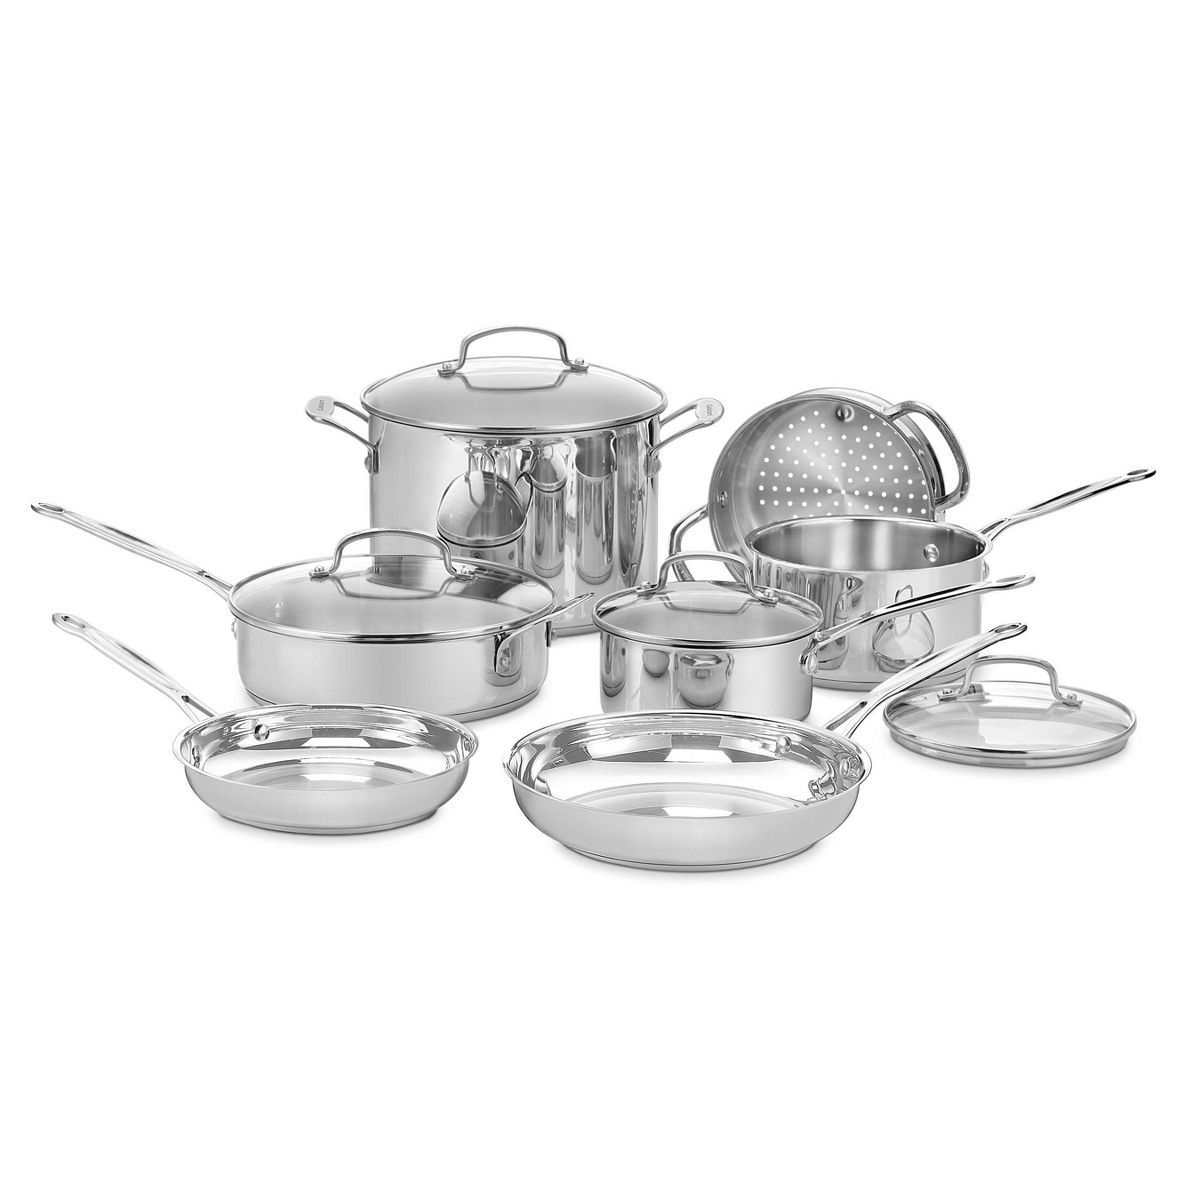 Cuisinart Chef's Classic 11pc Stainless Steel Cookware Set - 77-11G | Target